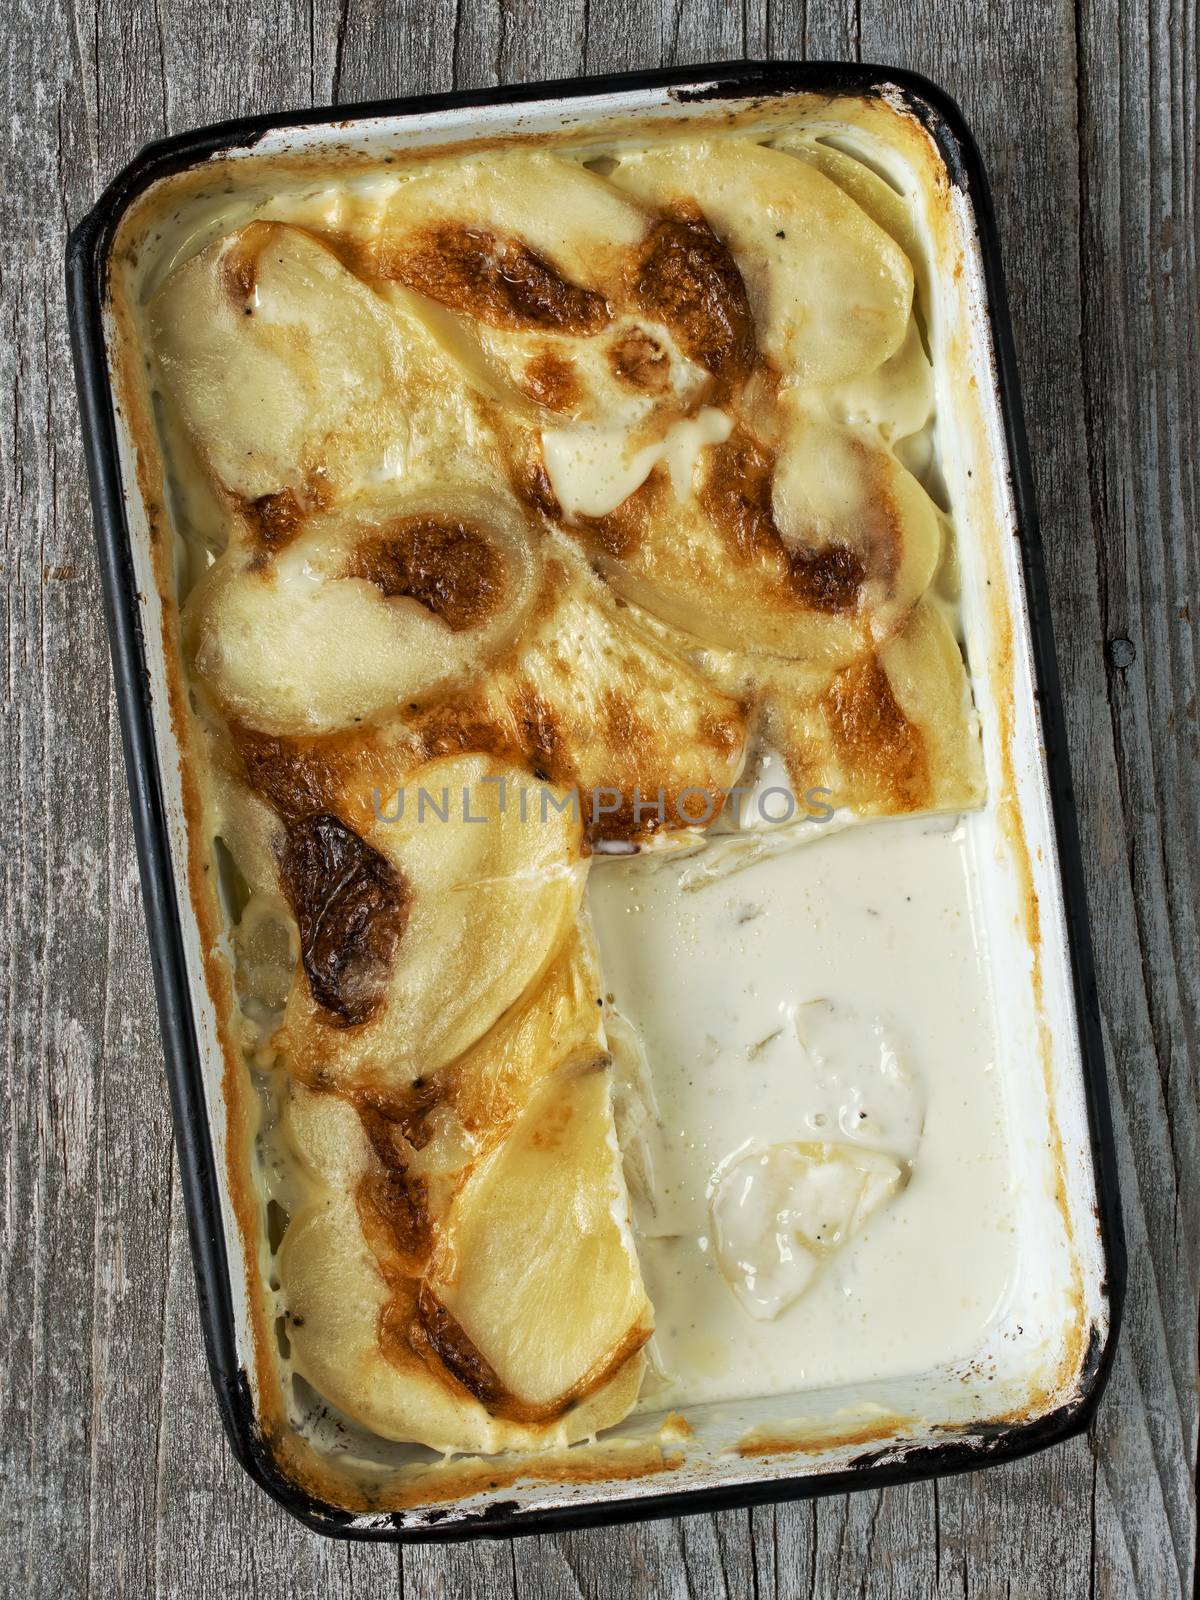 rustic golden scalloped potato gratin dauphinois by zkruger